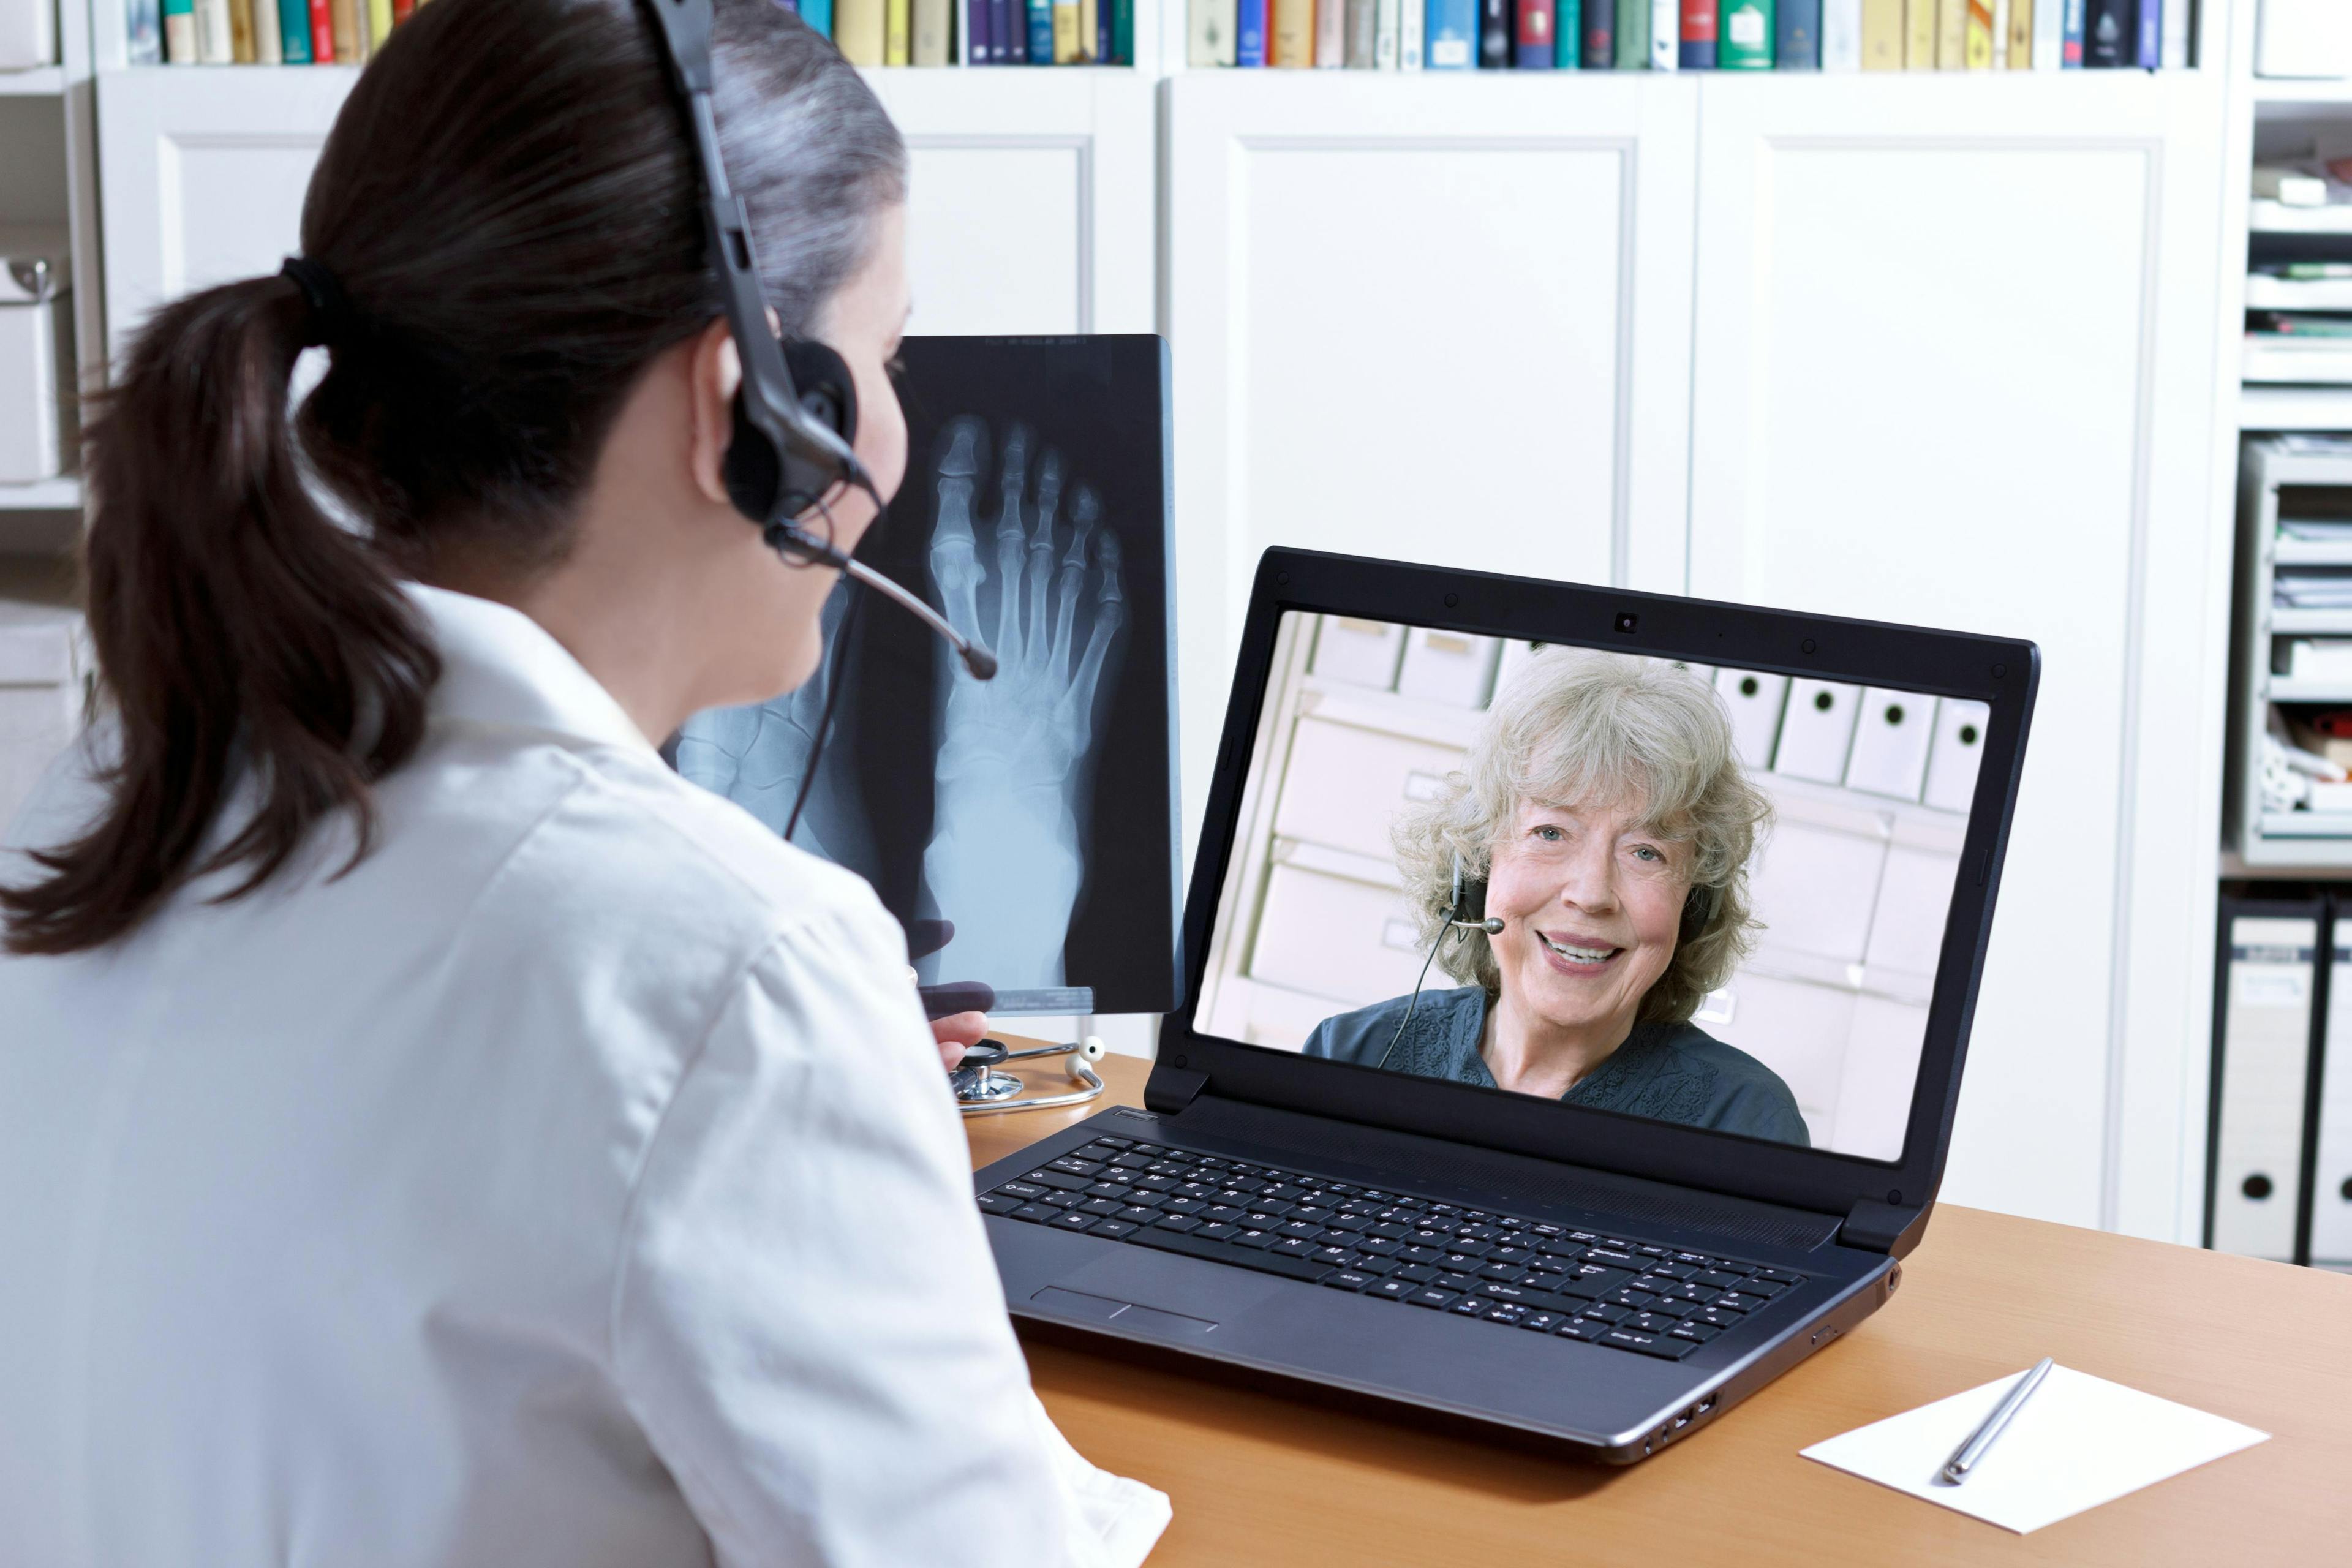 Patient participating in telehealth appoint with an endocrinologist